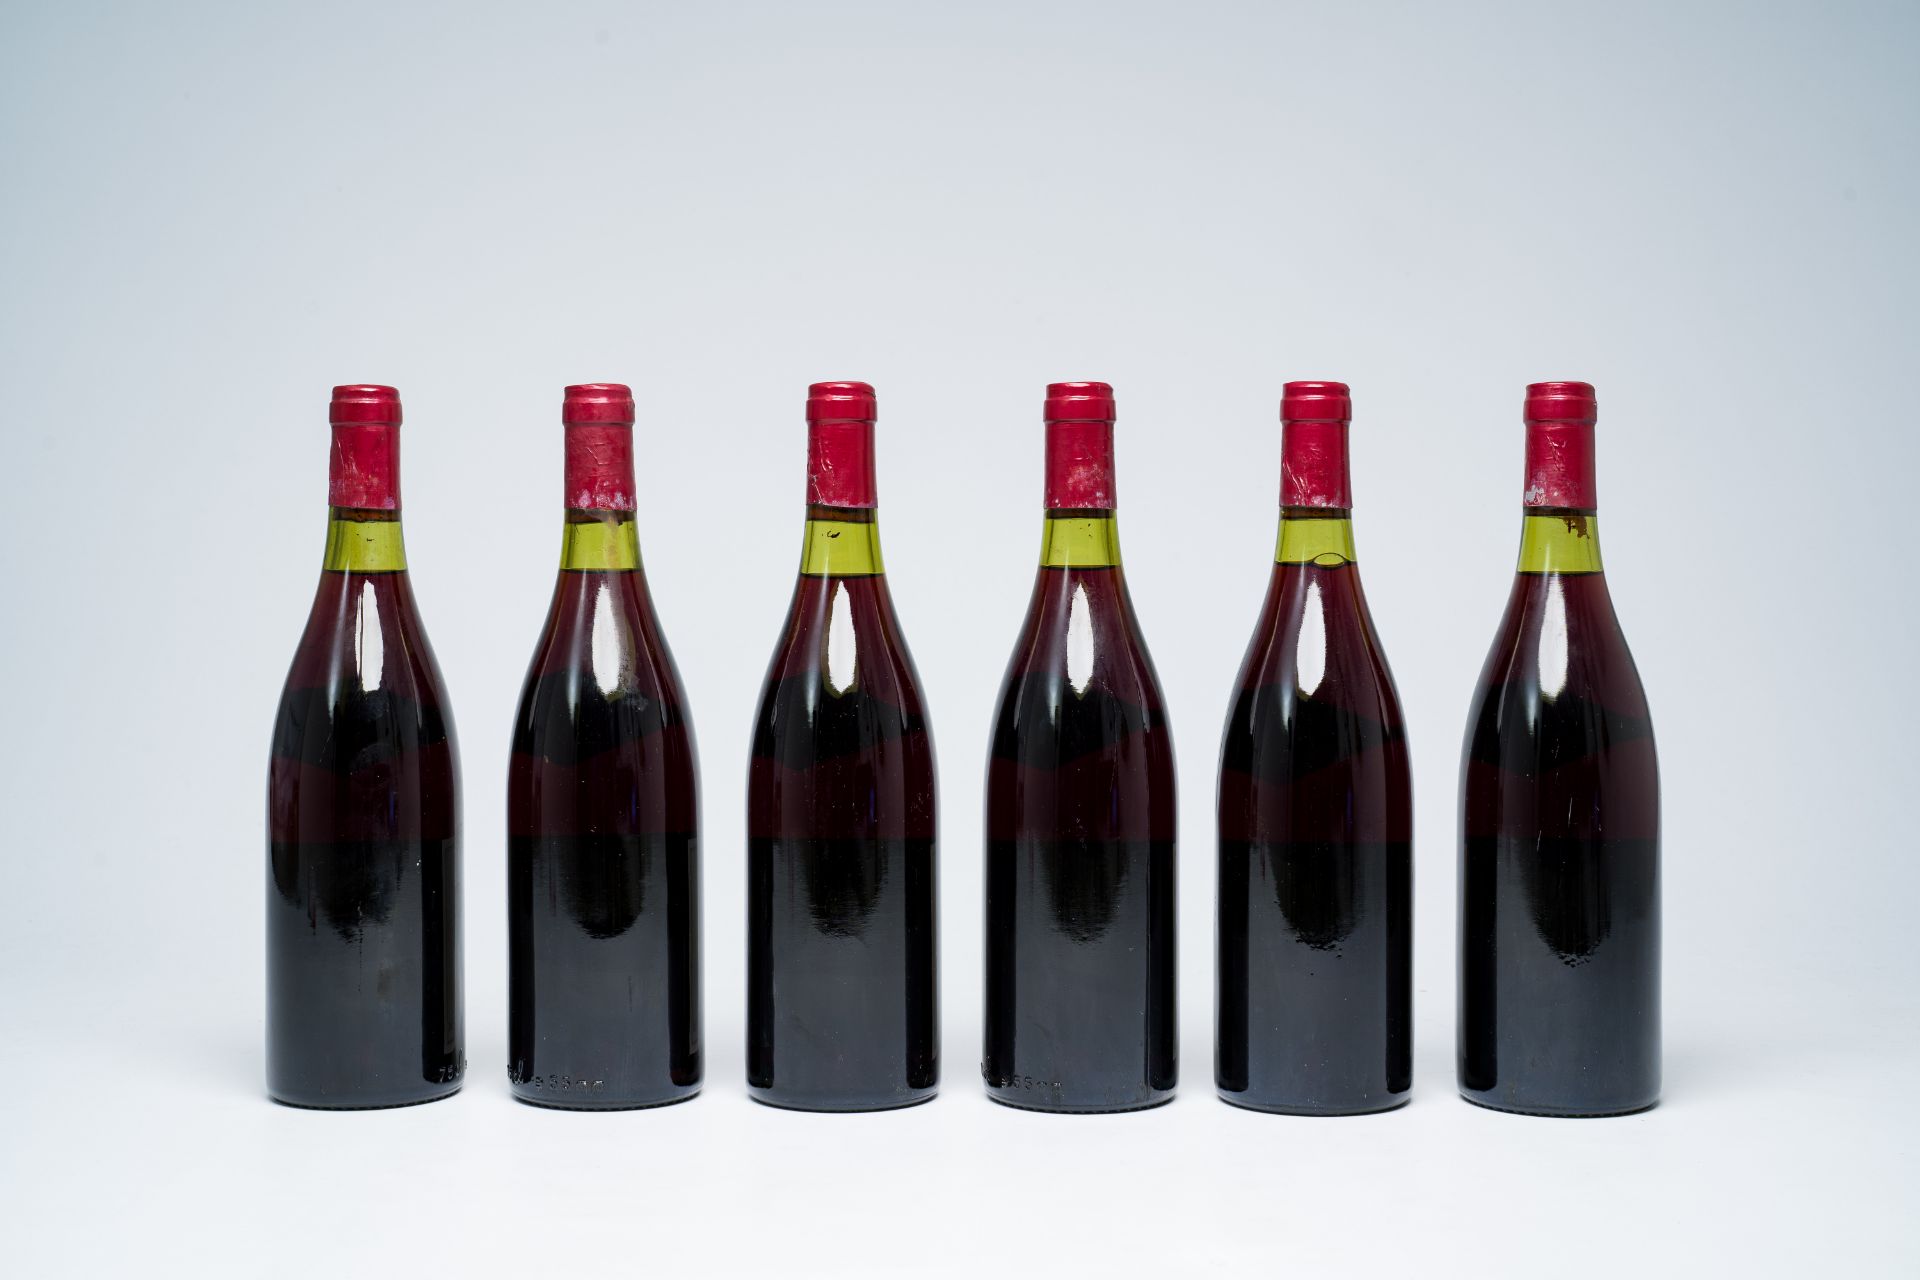 Sixteen bottles of Pommard Clos des Epeneaux, Comte Armand, 1976 and 1982 - Image 5 of 6